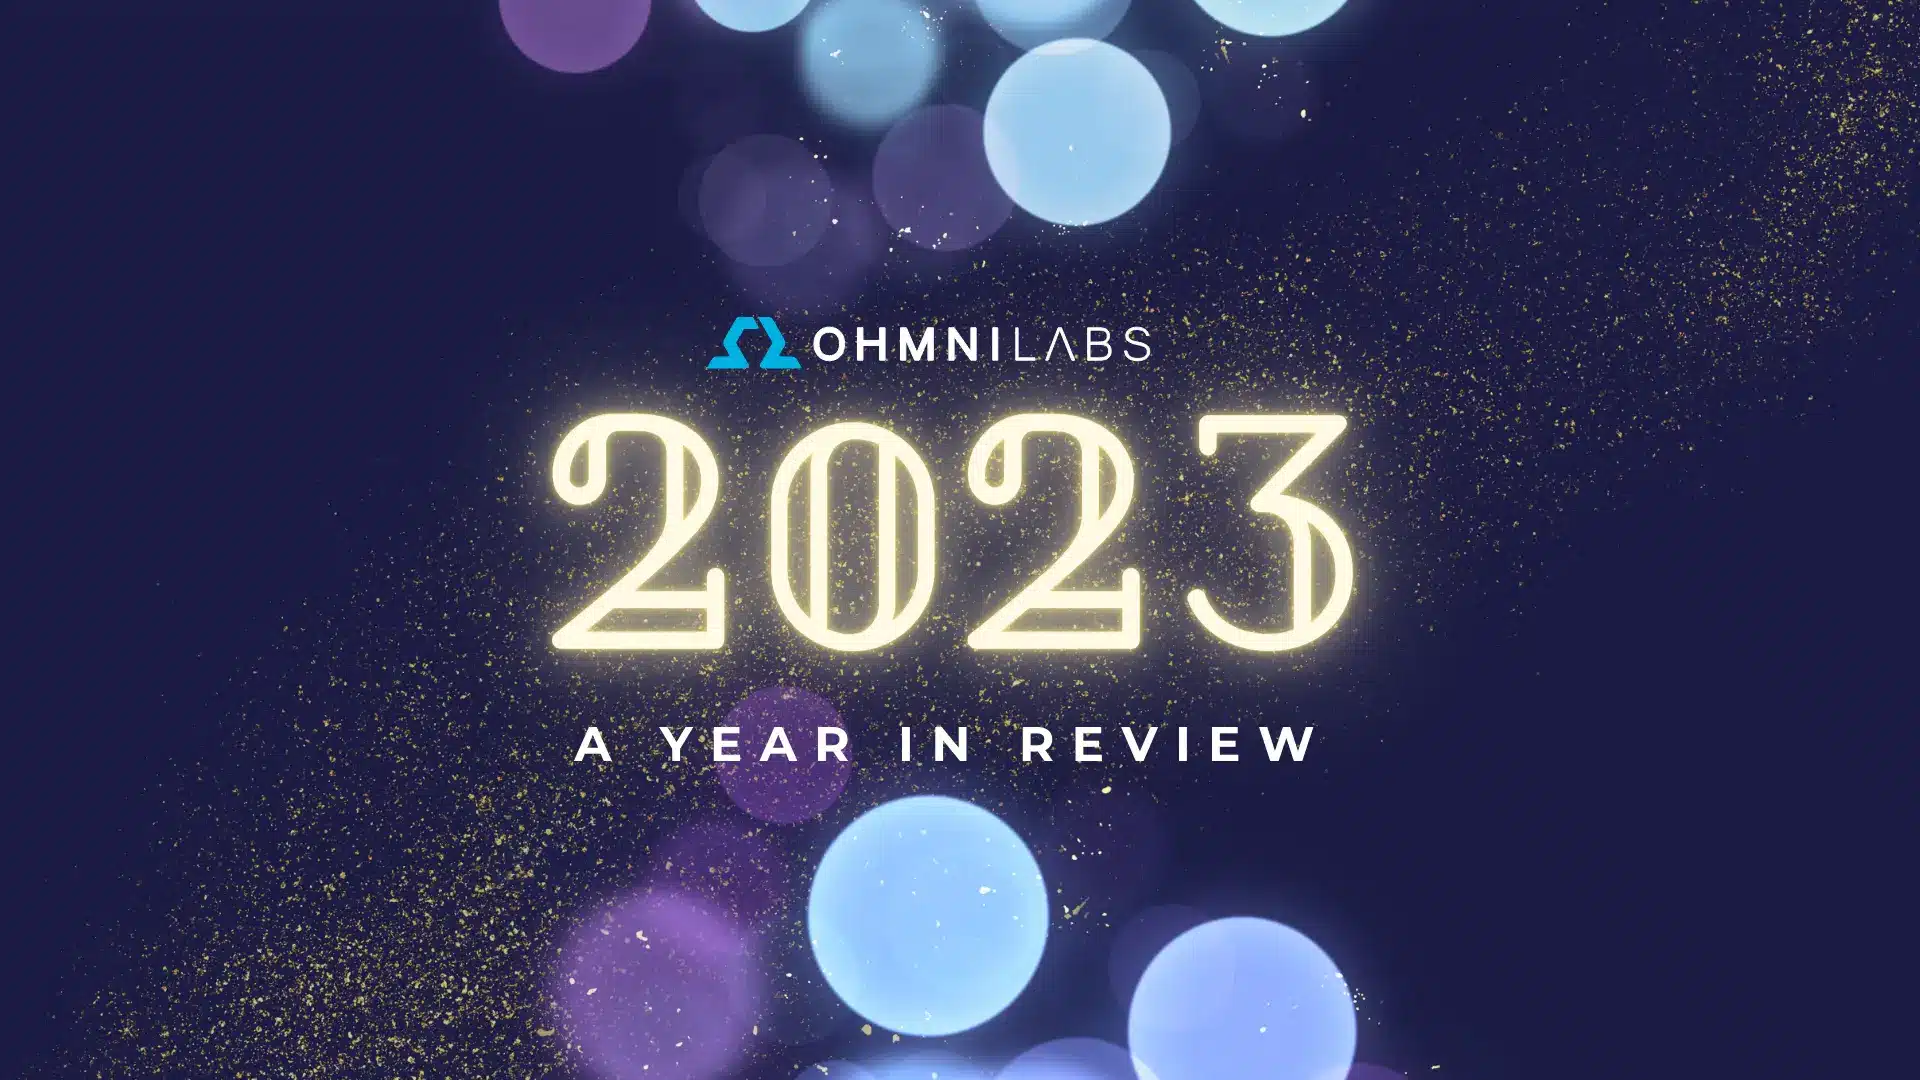 Feature image showing the blog title "OhmniLabs 2023: Year In Review"